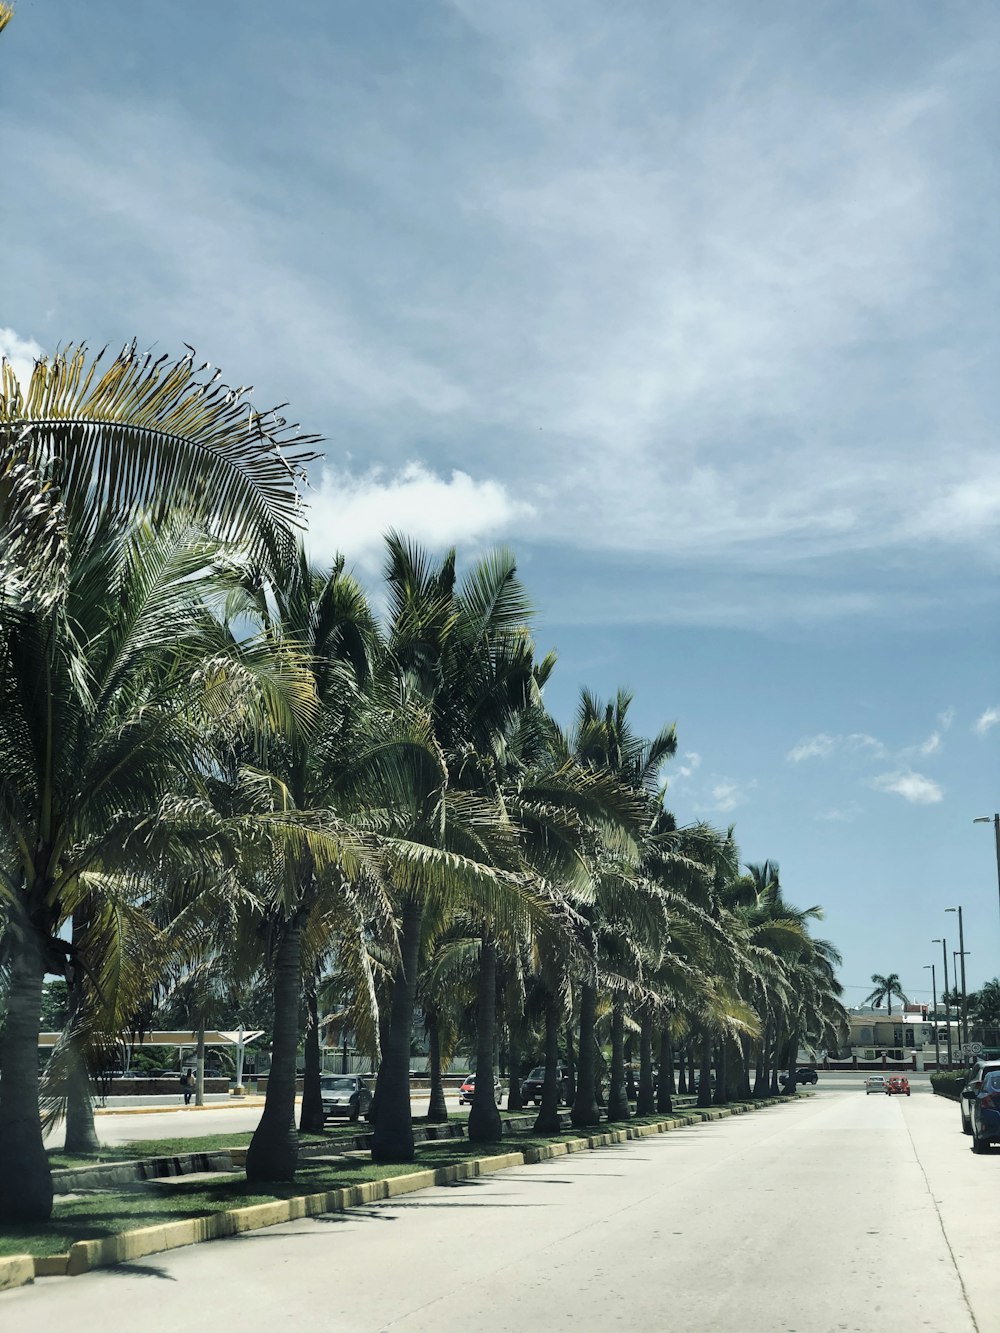 green palm trees near road during daytime